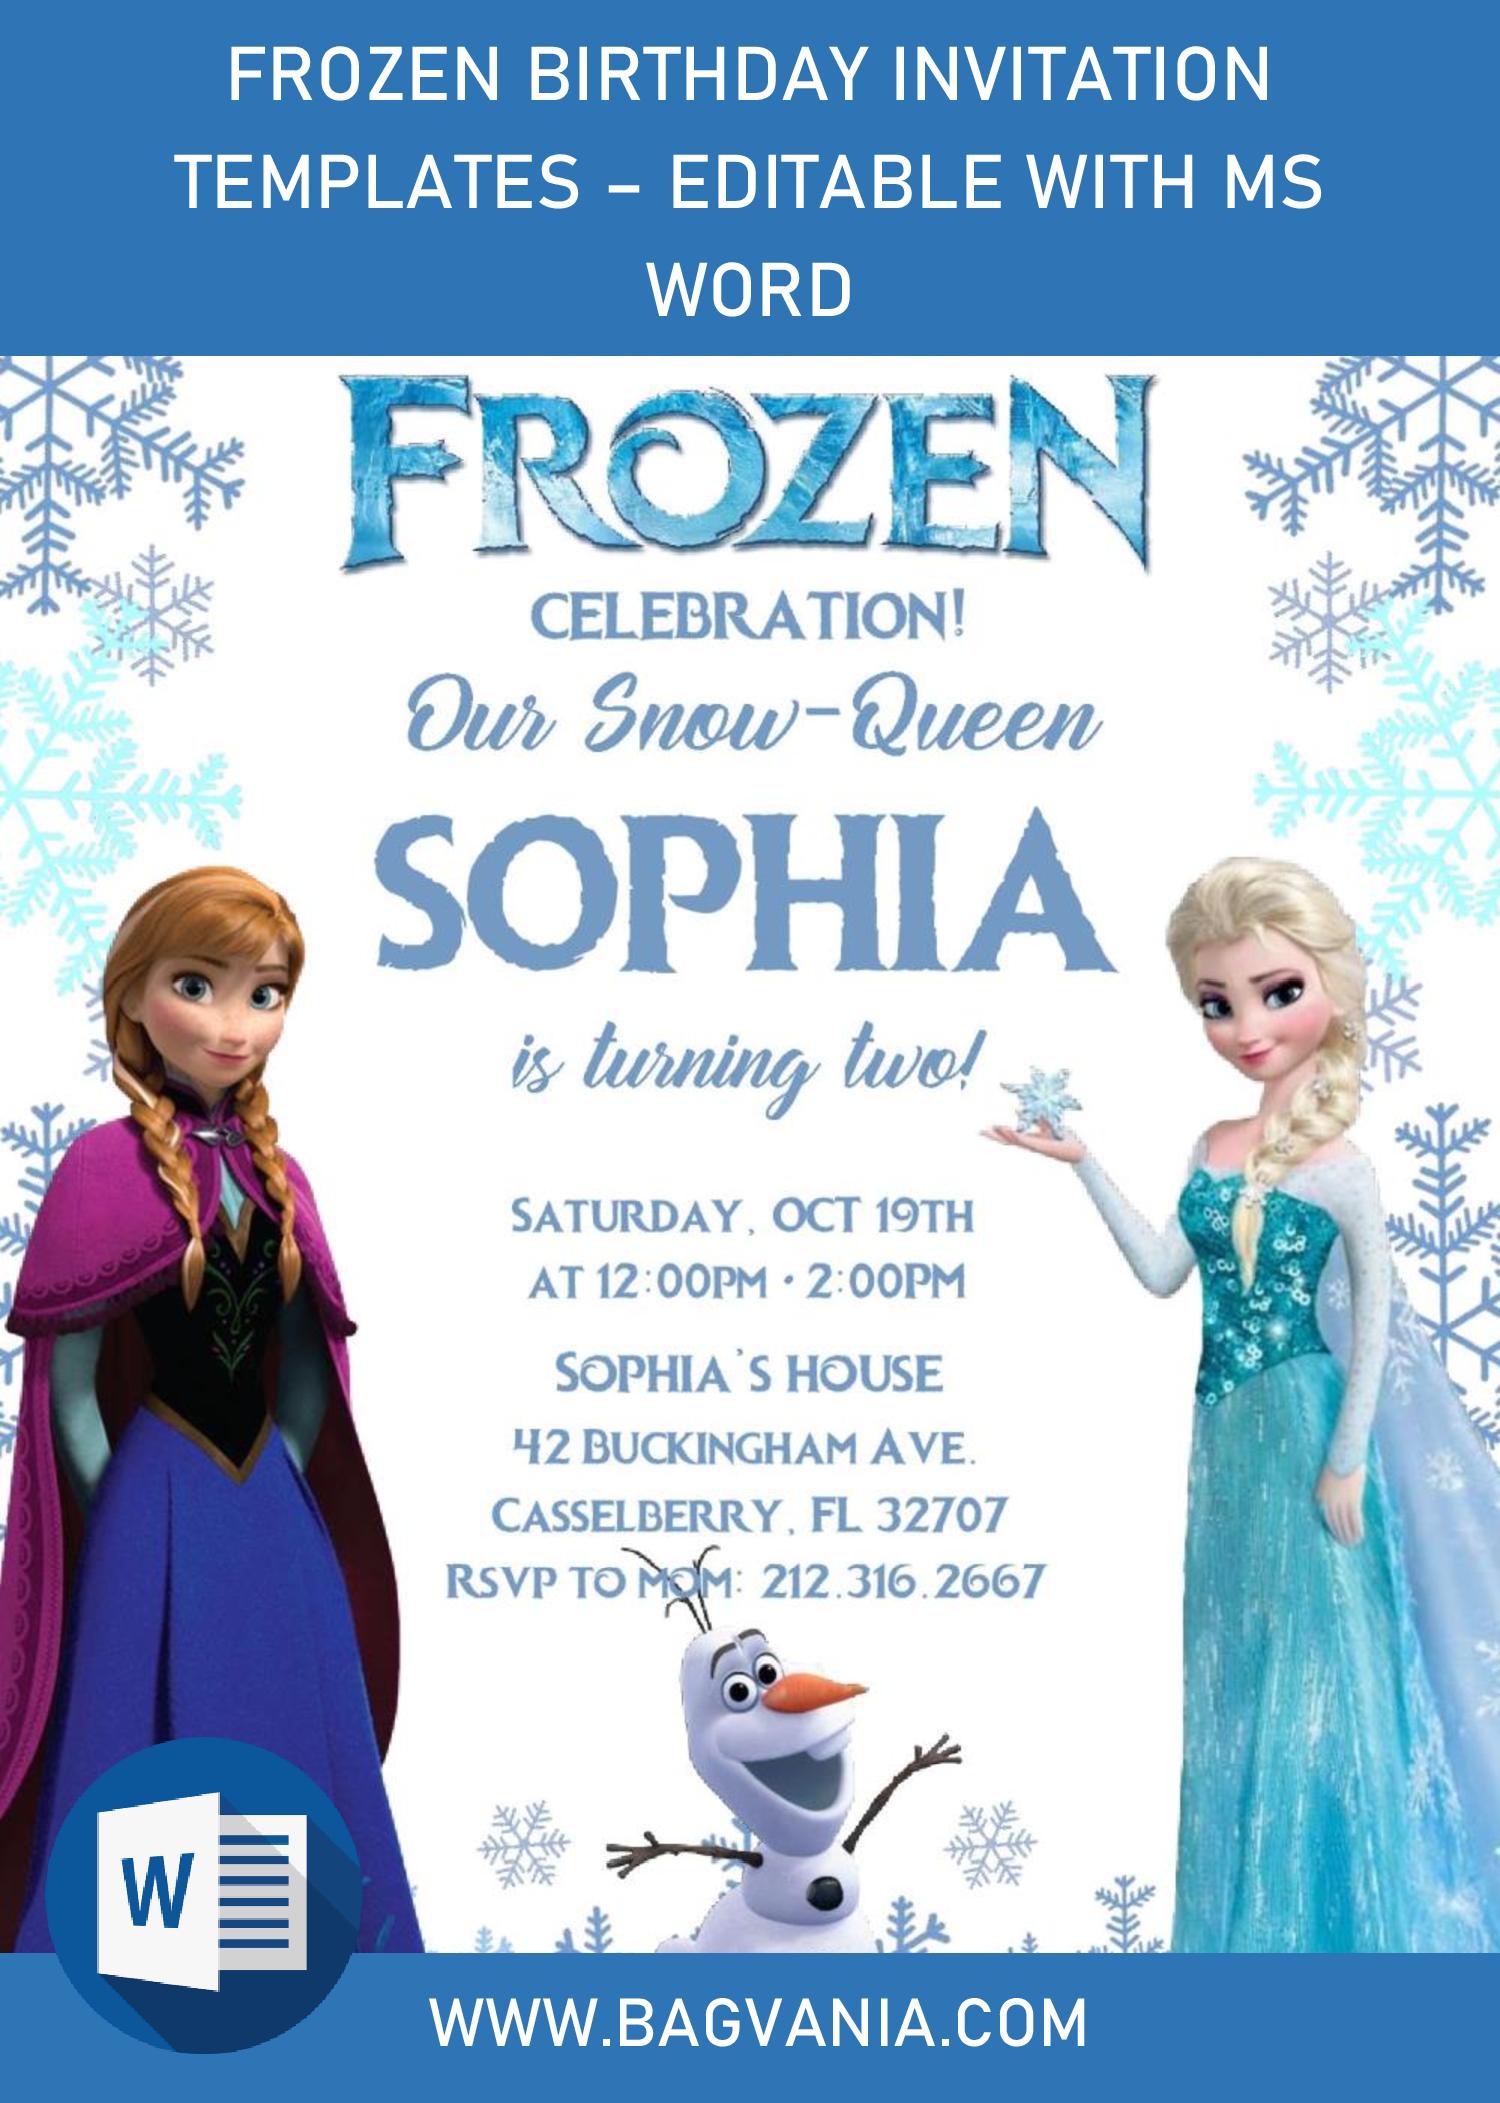 Frozen Invitation Templates – Editable With MS Word  FREE Throughout Frozen Birthday Card Template